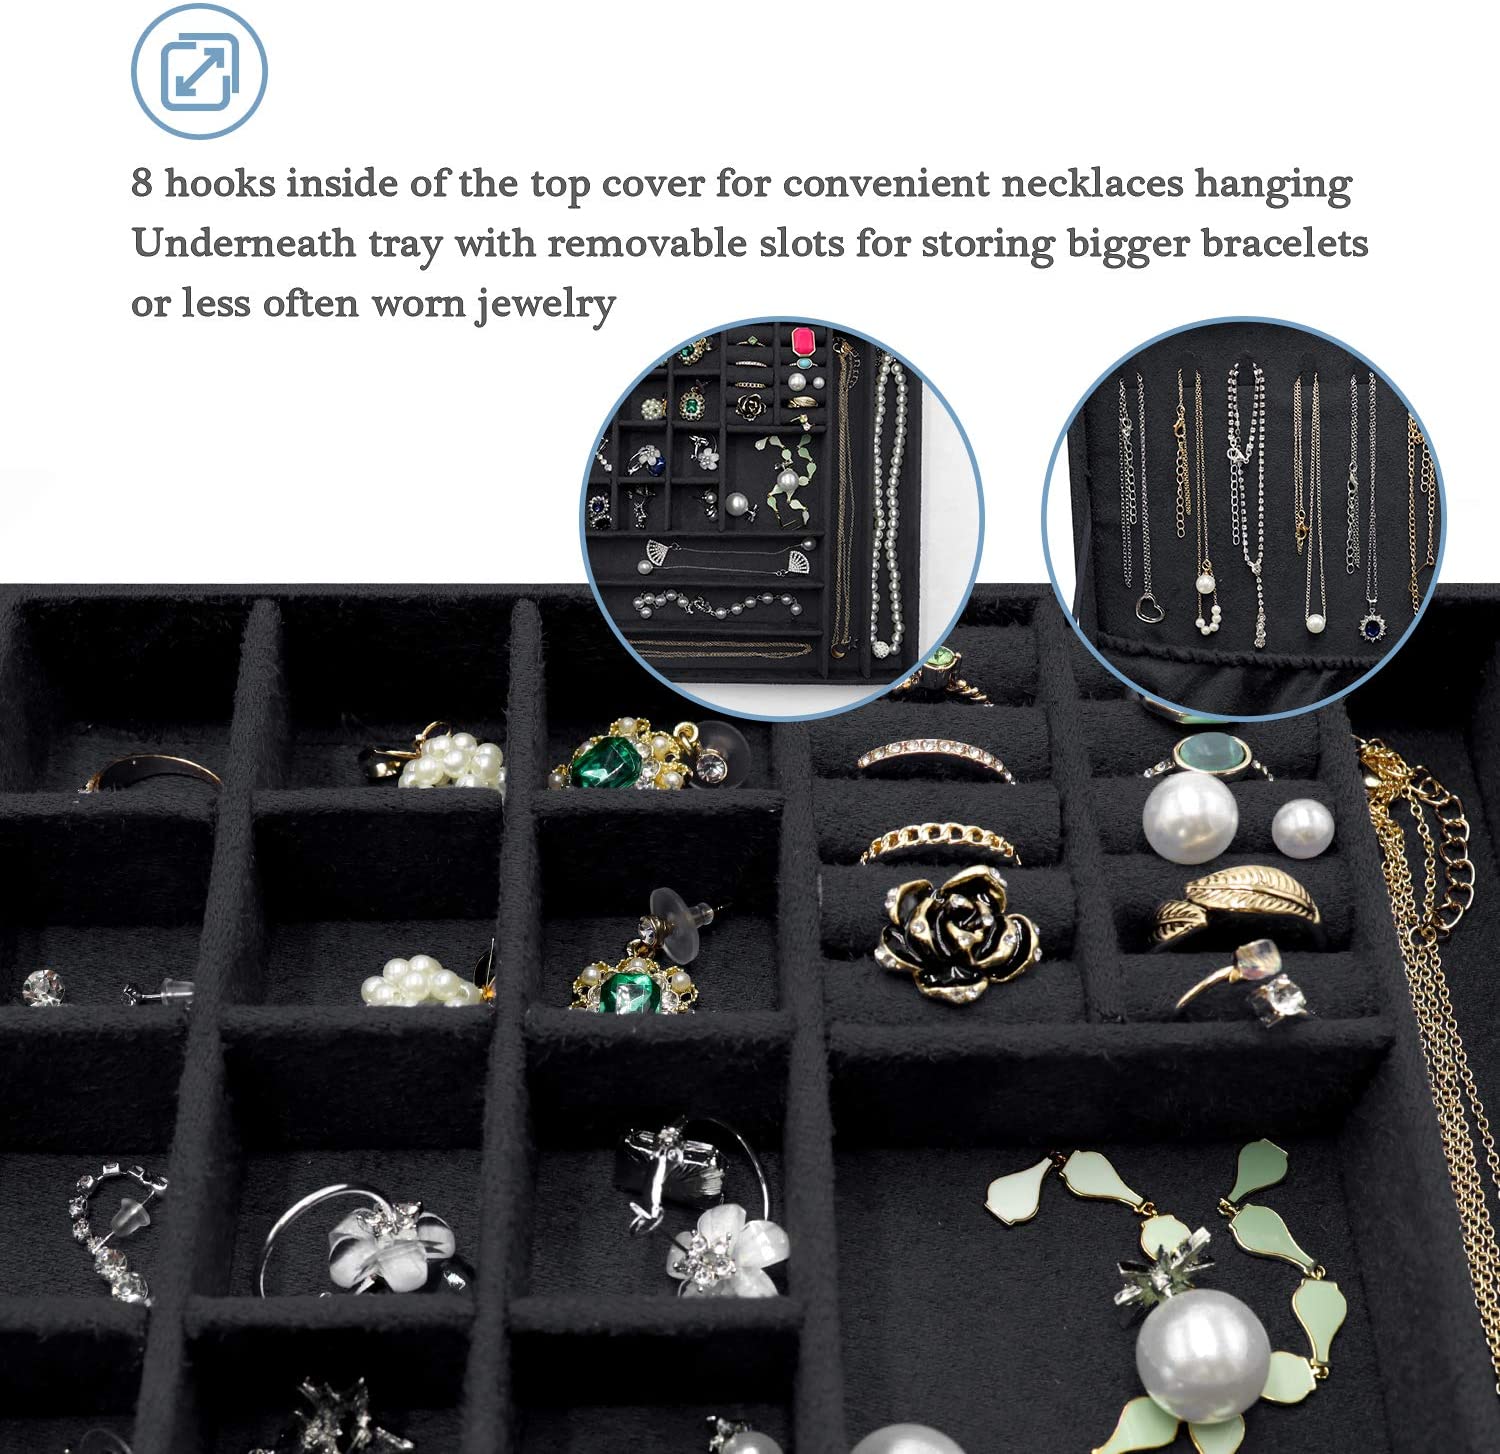 How to organize jewelry in a drawer